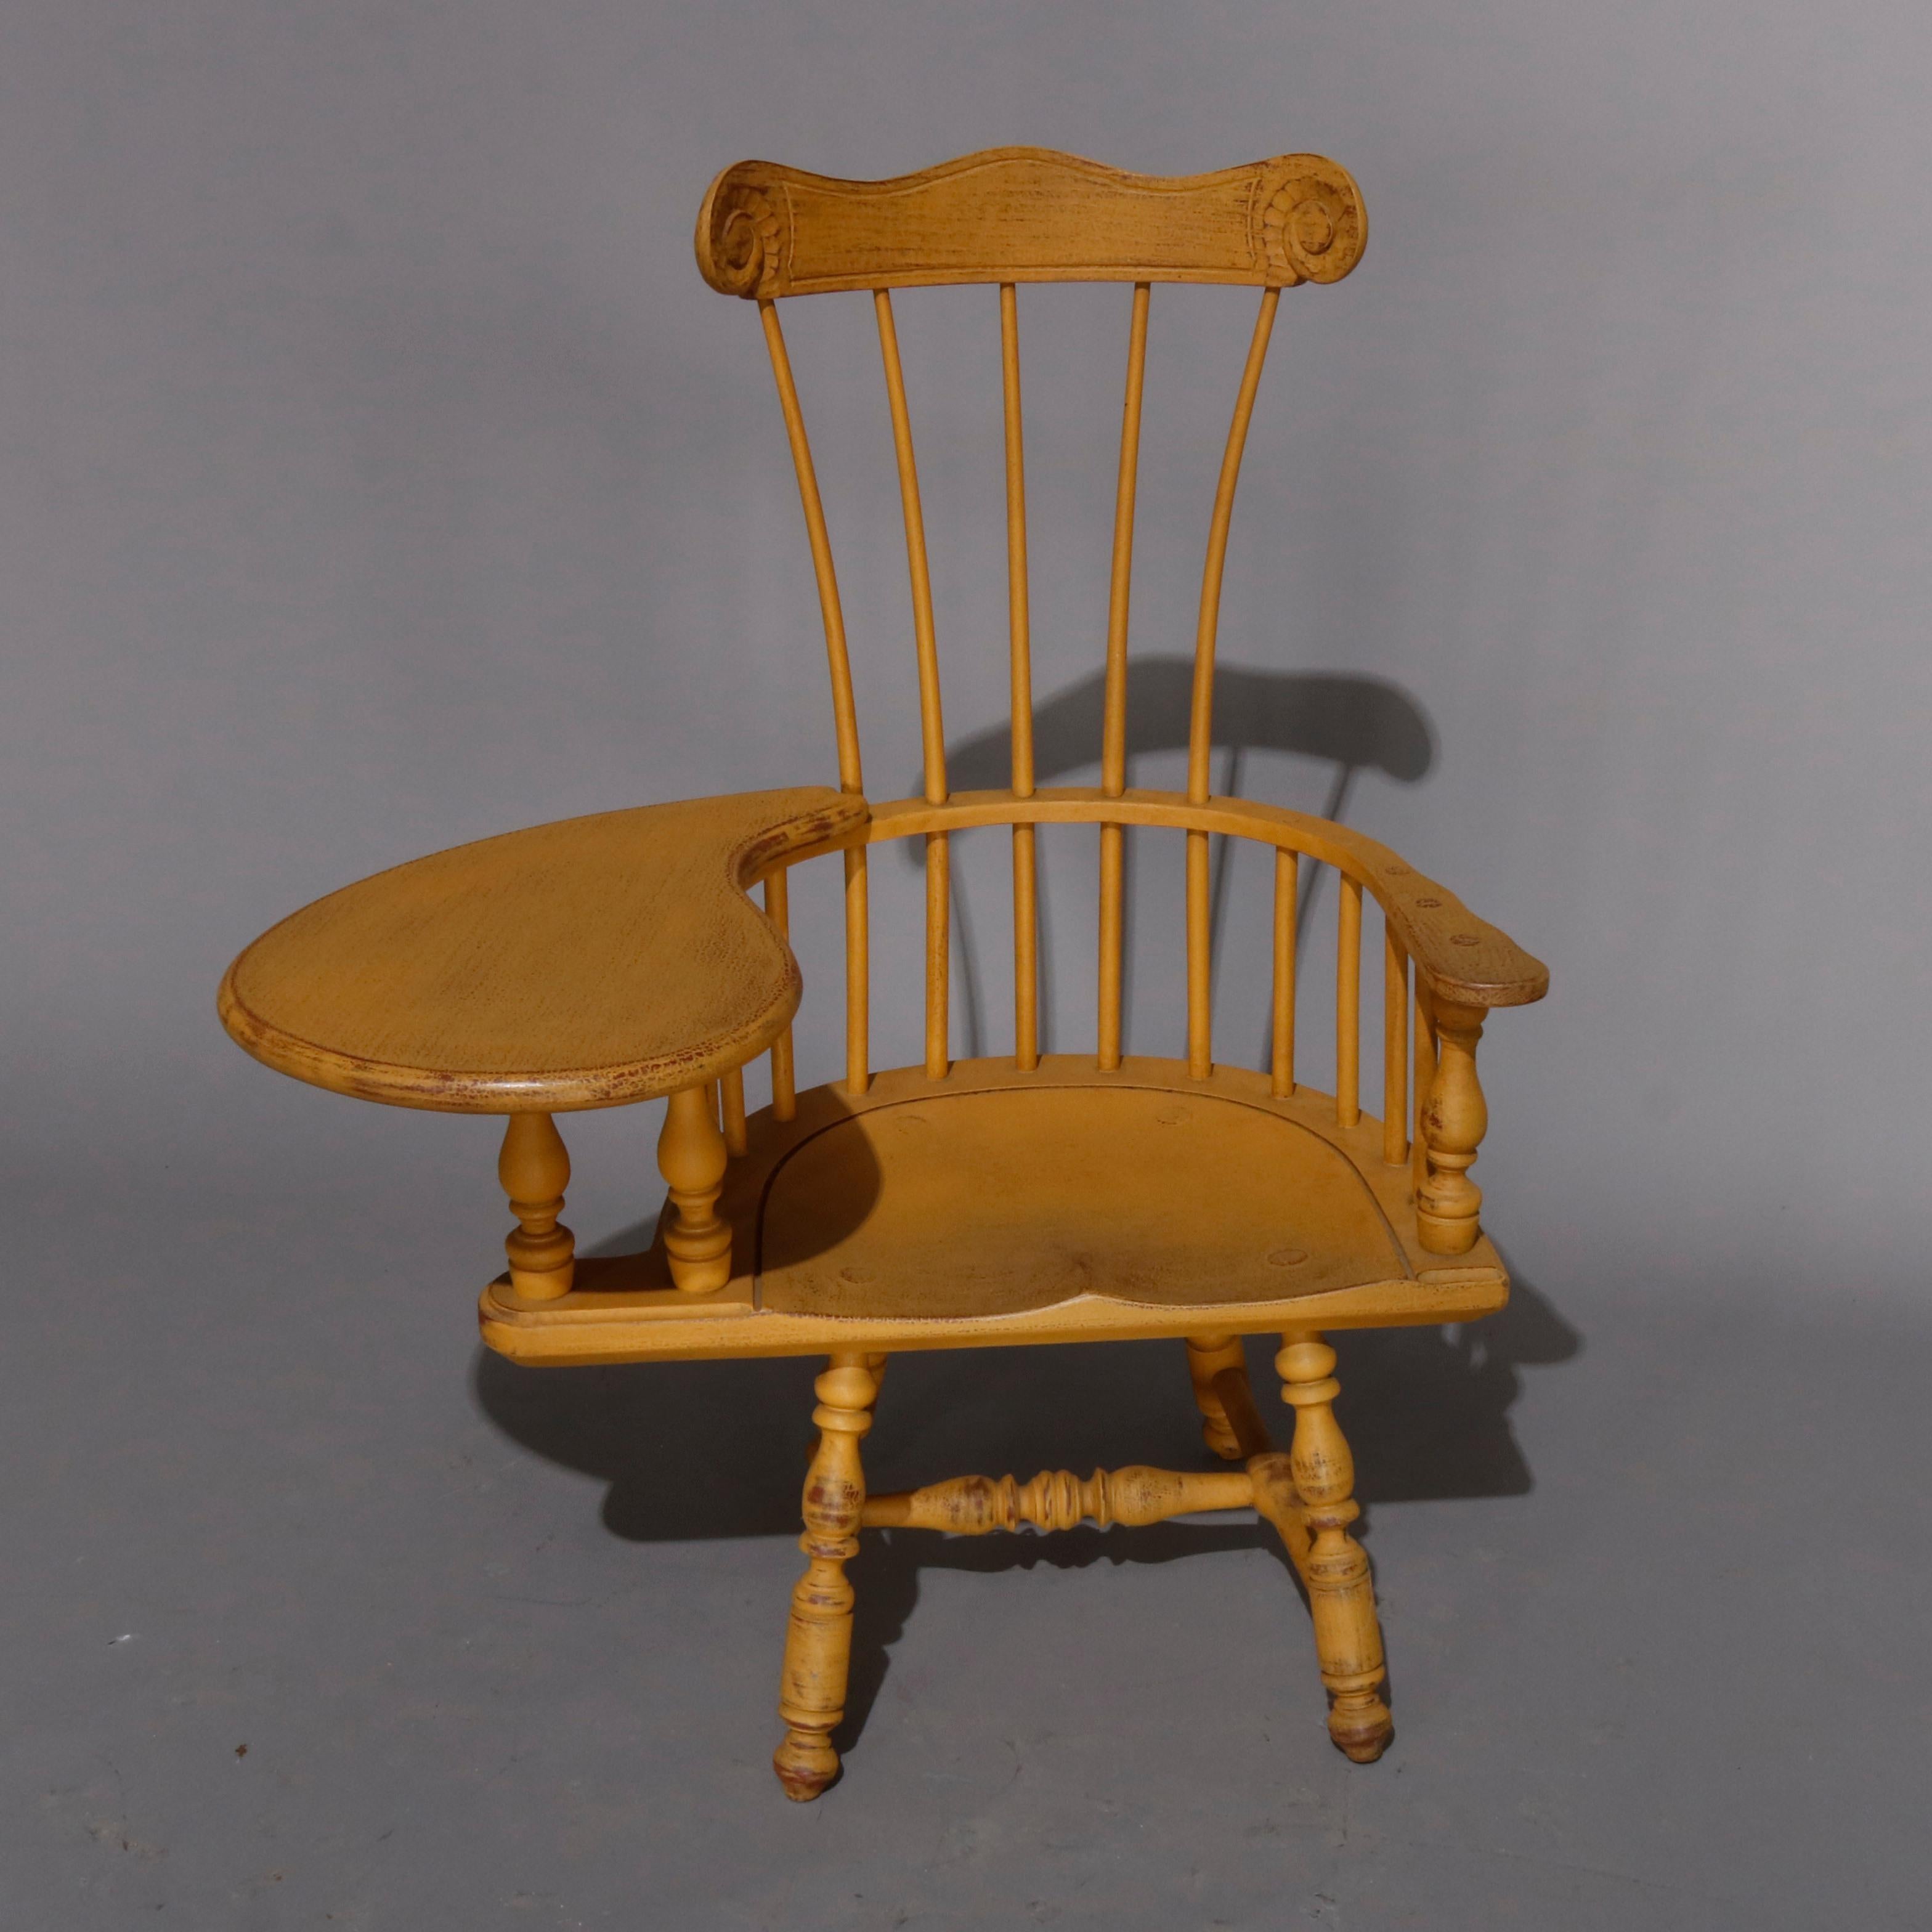 Child's writing arm Windsor chair offers yellow painted tall back chair with scroll crest surmounting spindle back and arms, one with writing desk, 20th century

***DELIVERY NOTICE – Due to COVID-19 we are employing NO-CONTACT PRACTICES in the